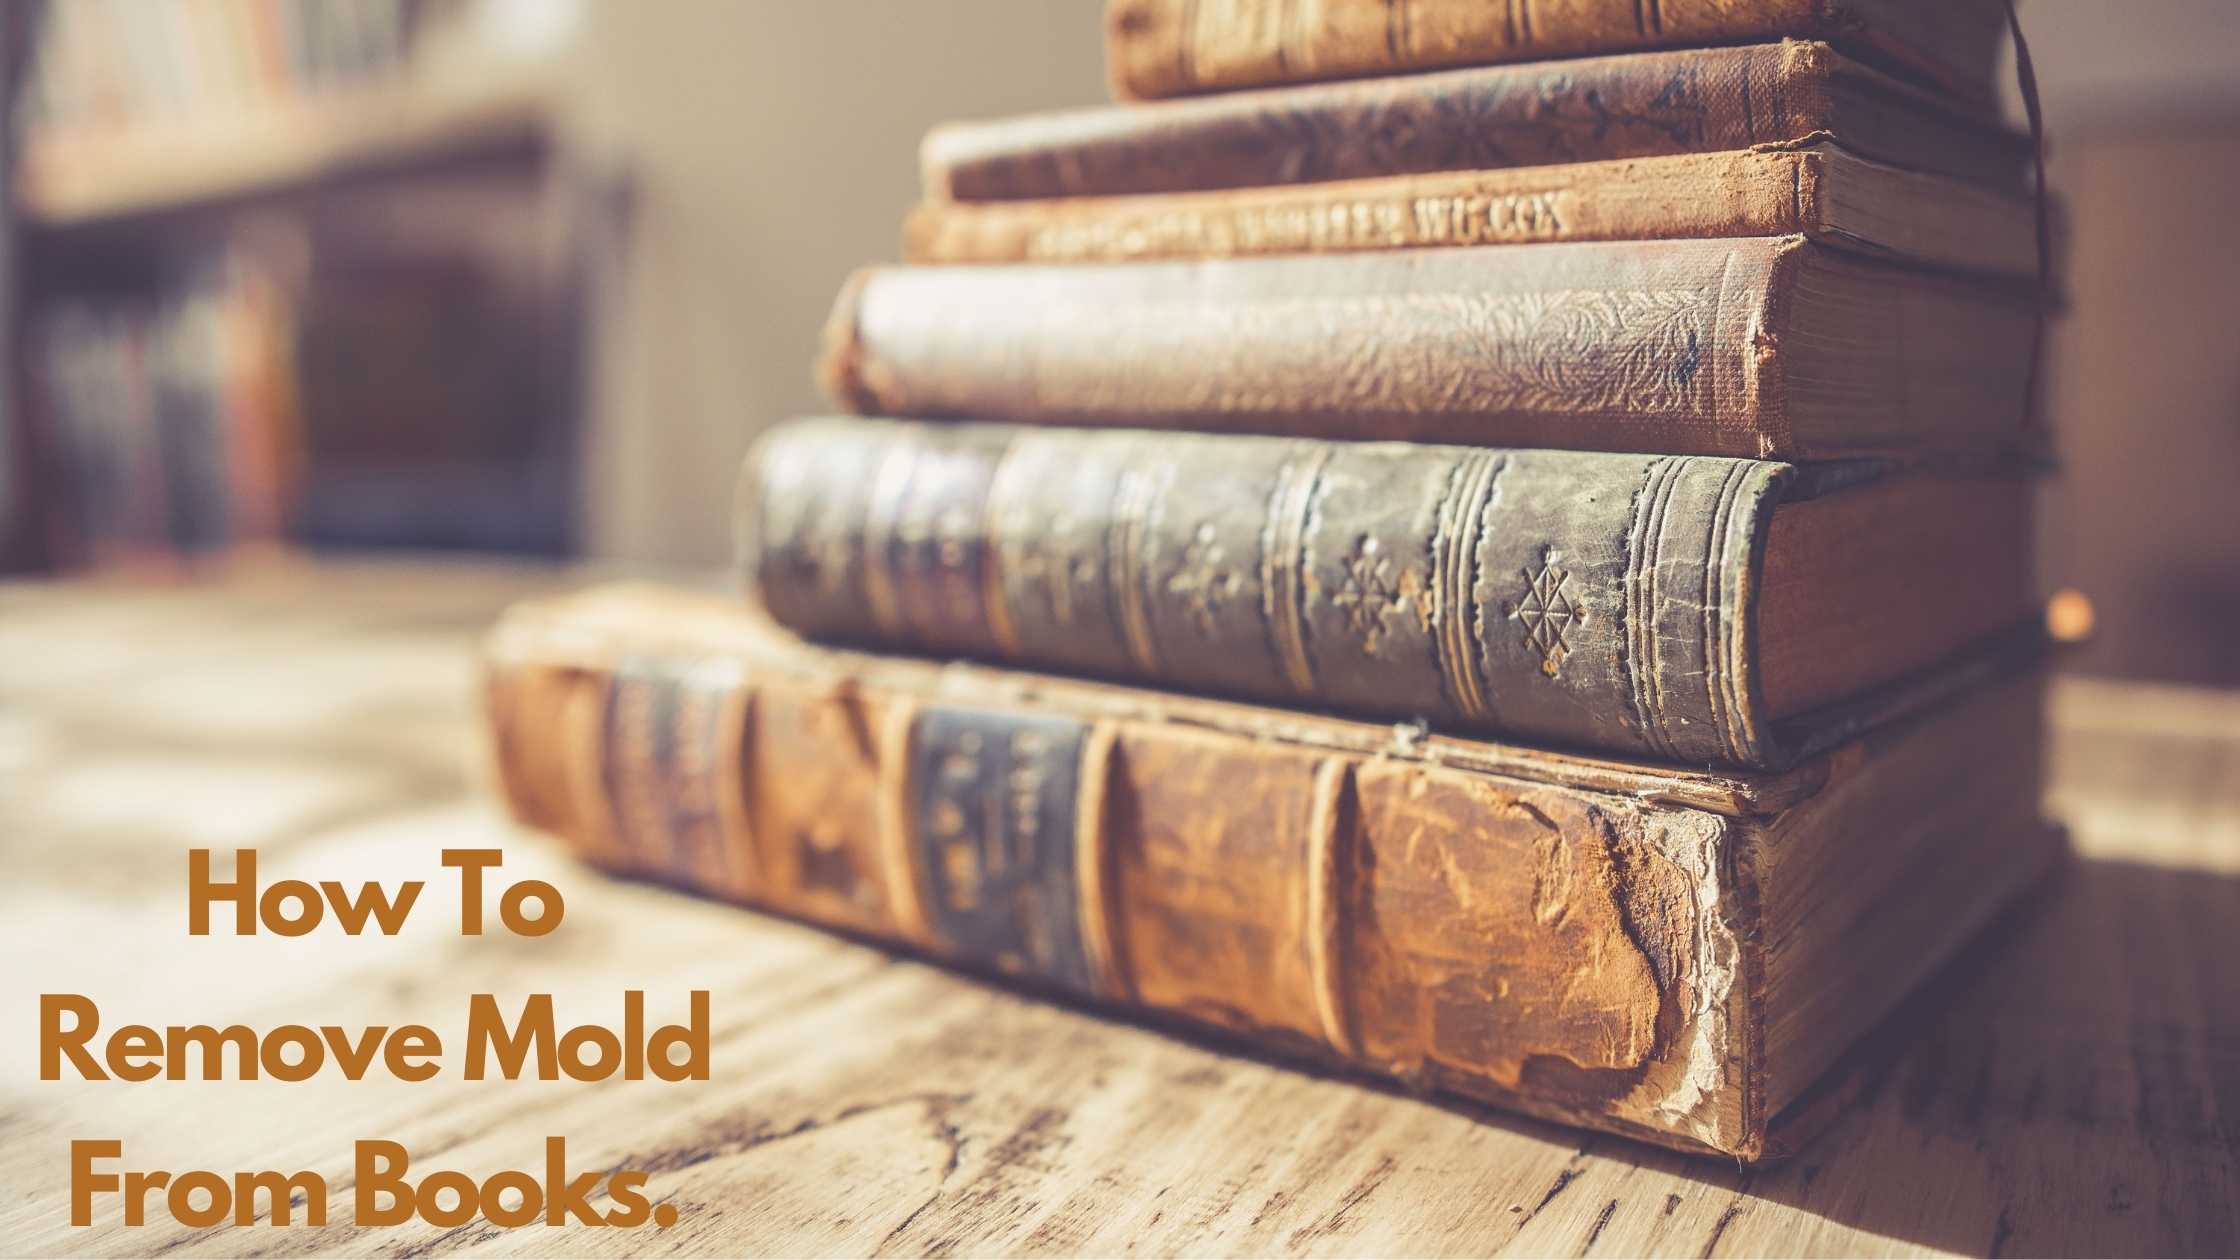 How to remove mold from books